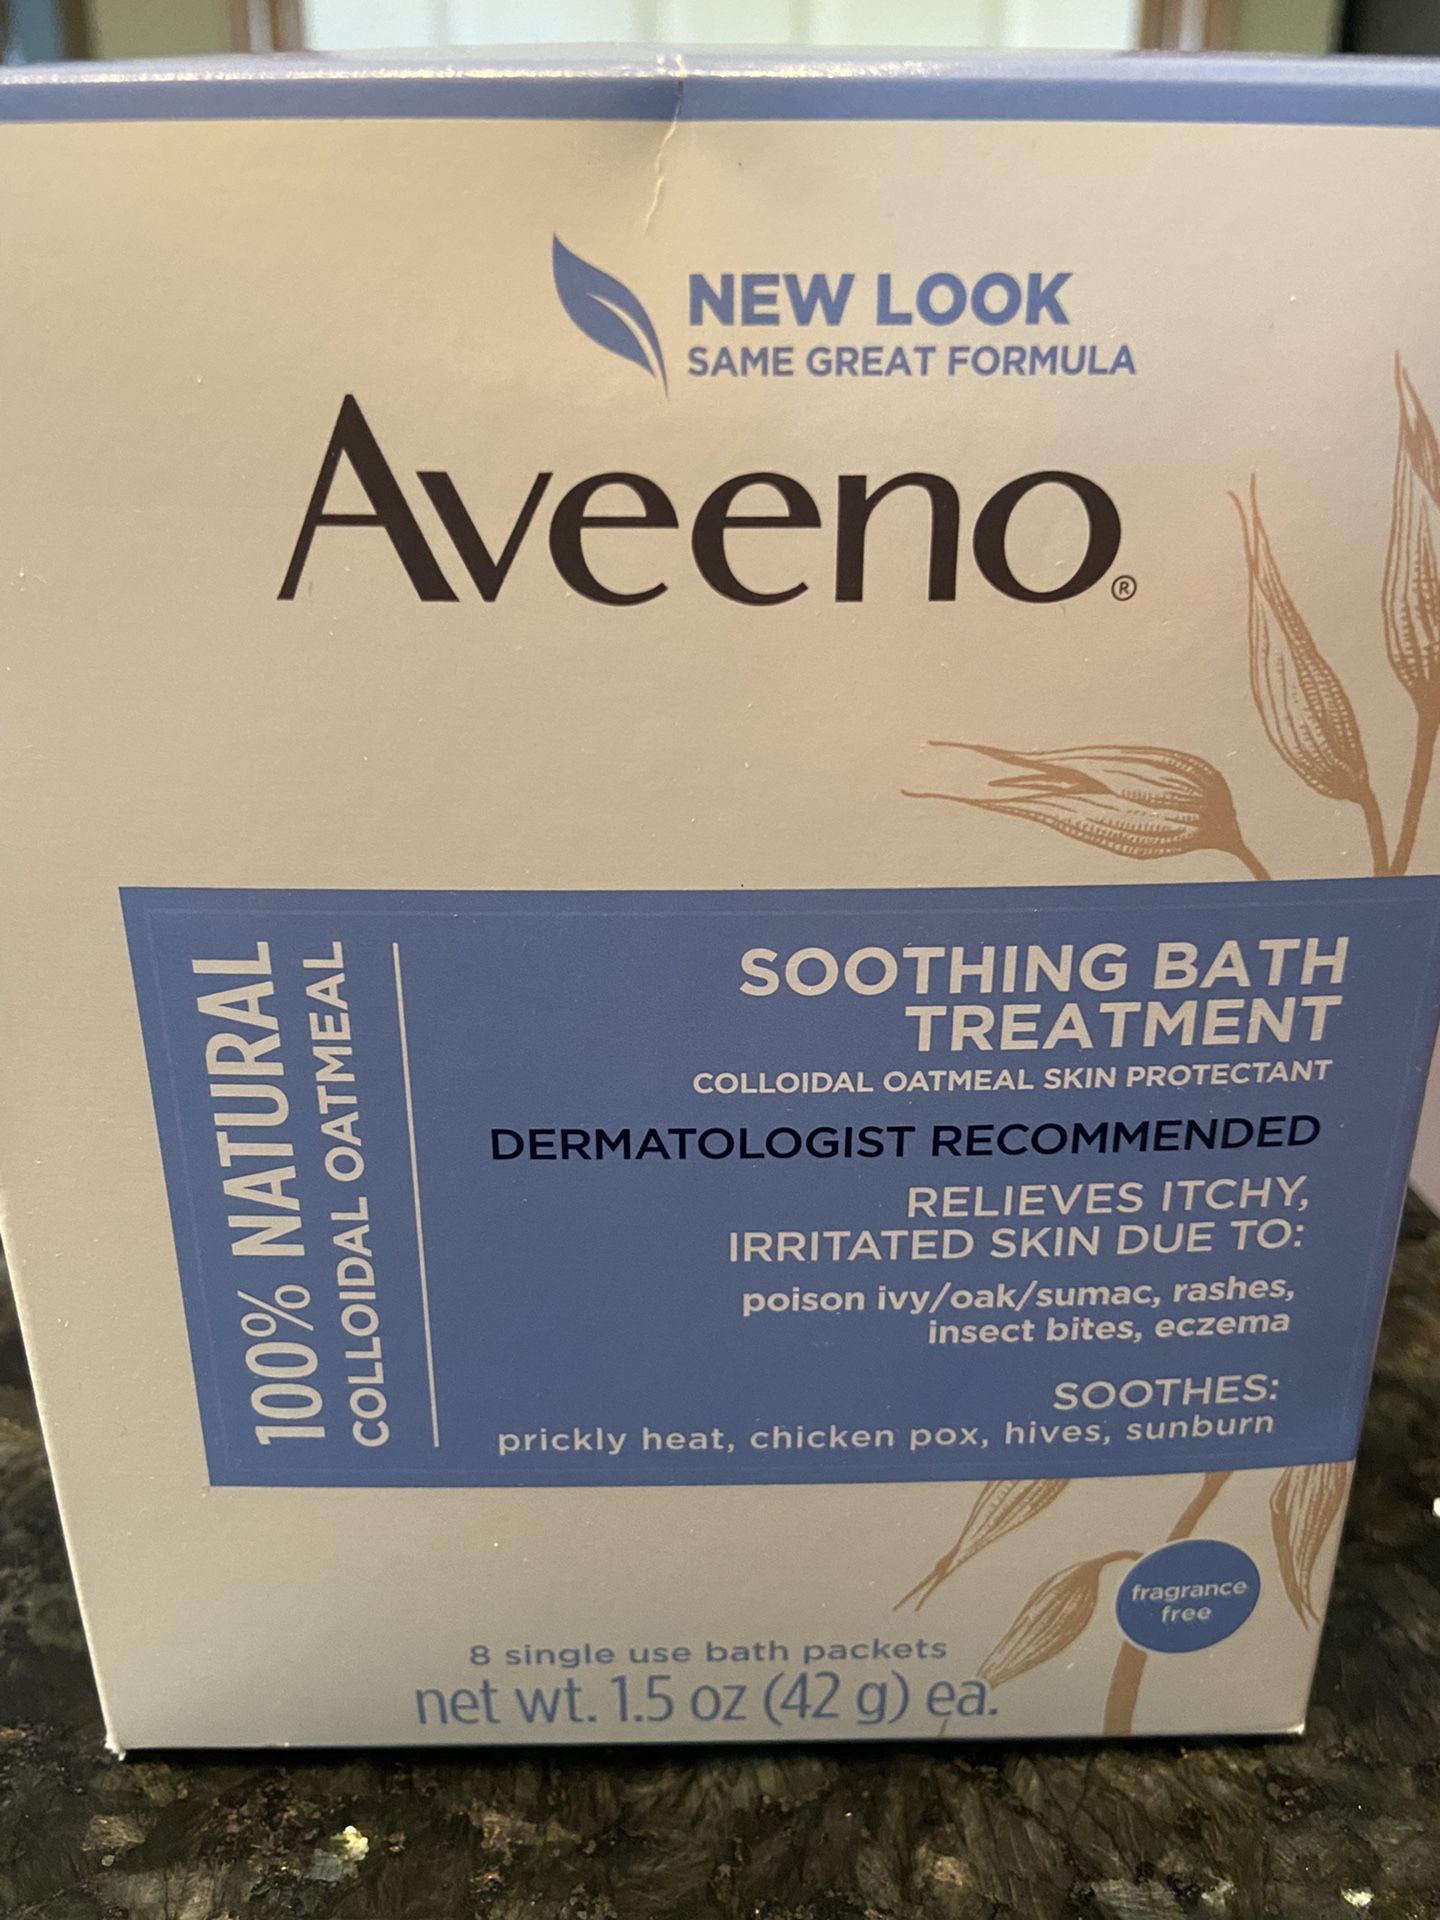 AVEENO Soothing Bath Treatment Packets. UNOPENED. 8 Single Use Bath Packets. 100% Natural Colloidal Oatmeal. Porch pick up in Dublin. 